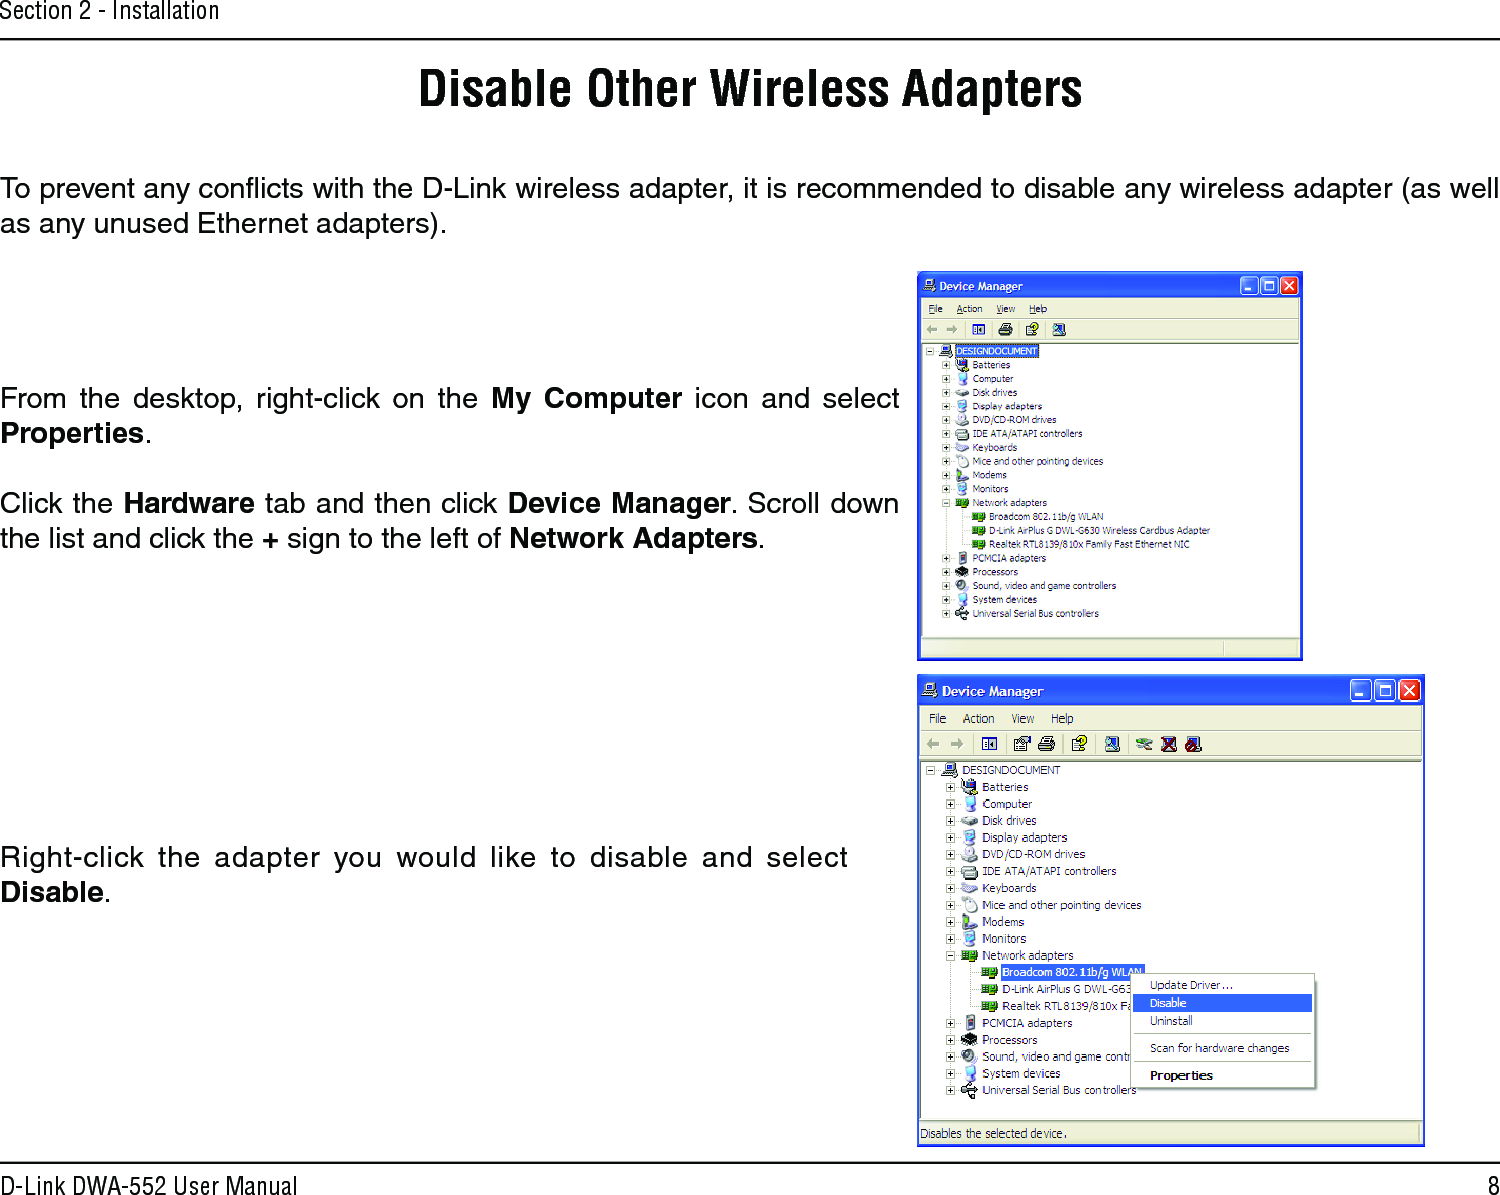 8D-Link DWA-552 User ManualSection 2 - InstallationDisable Other Wireless AdaptersTo prevent any conﬂicts with the D-Link wireless adapter, it is recommended to disable any wireless adapter (as well as any unused Ethernet adapters).From  the  desktop,  right-click  on  the  My  Computer  icon  and  select Properties. Click the Hardware tab and then click Device Manager. Scroll down the list and click the + sign to the left of Network Adapters.Right-click  the  adapter  you  would  like  to  disable  and  select Disable.